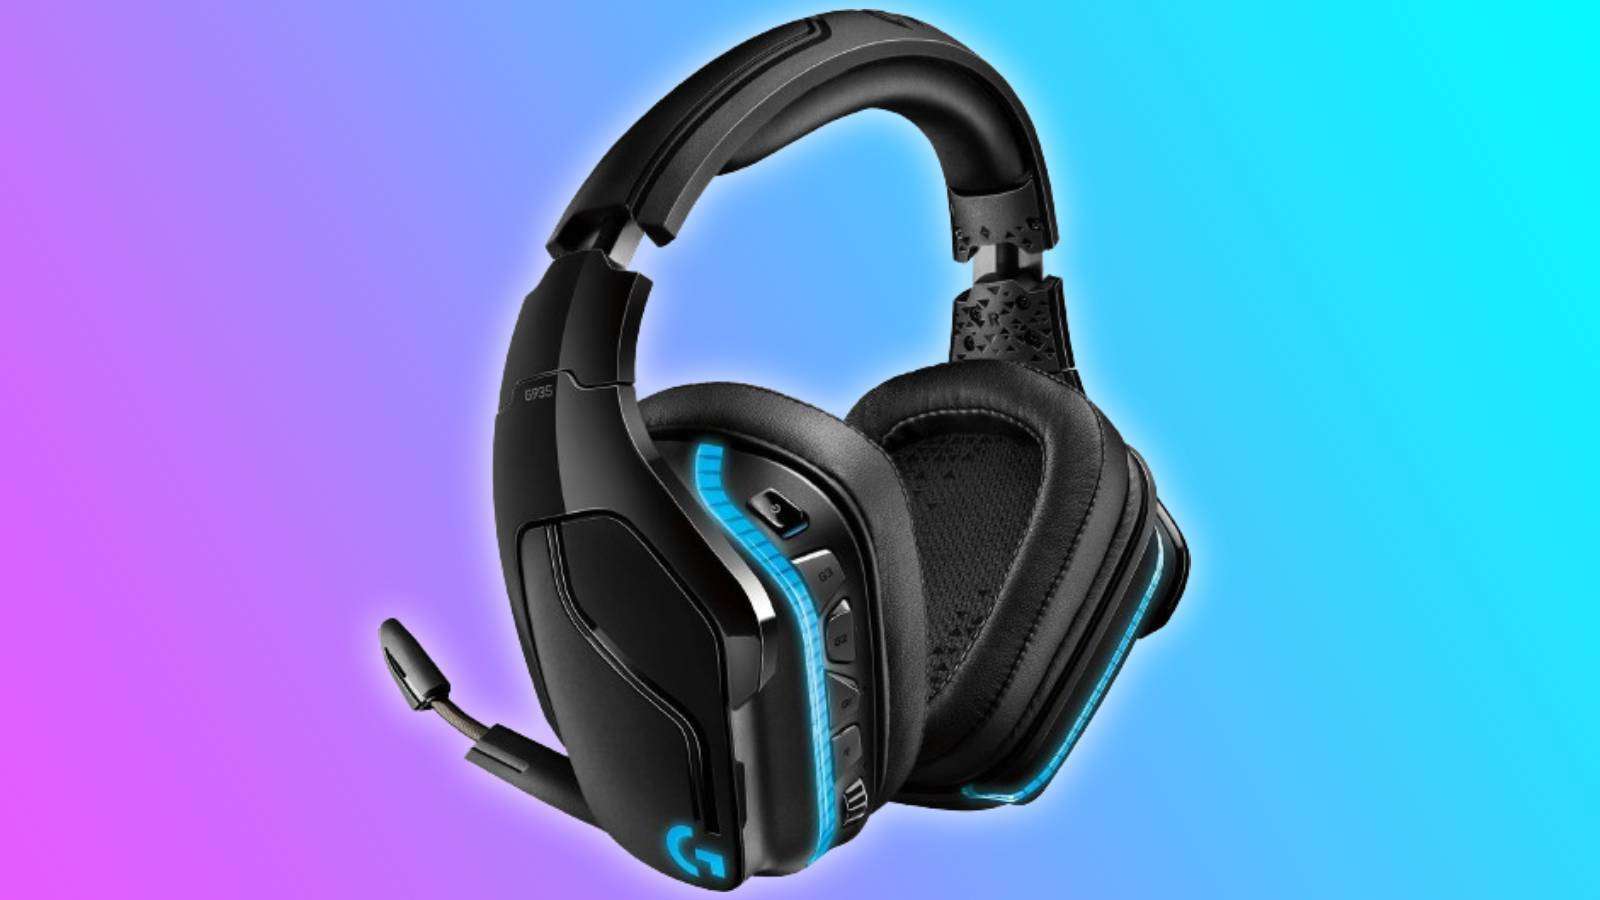 Image of the Logitech G935 wireless gaming headset on a purple and blue background.